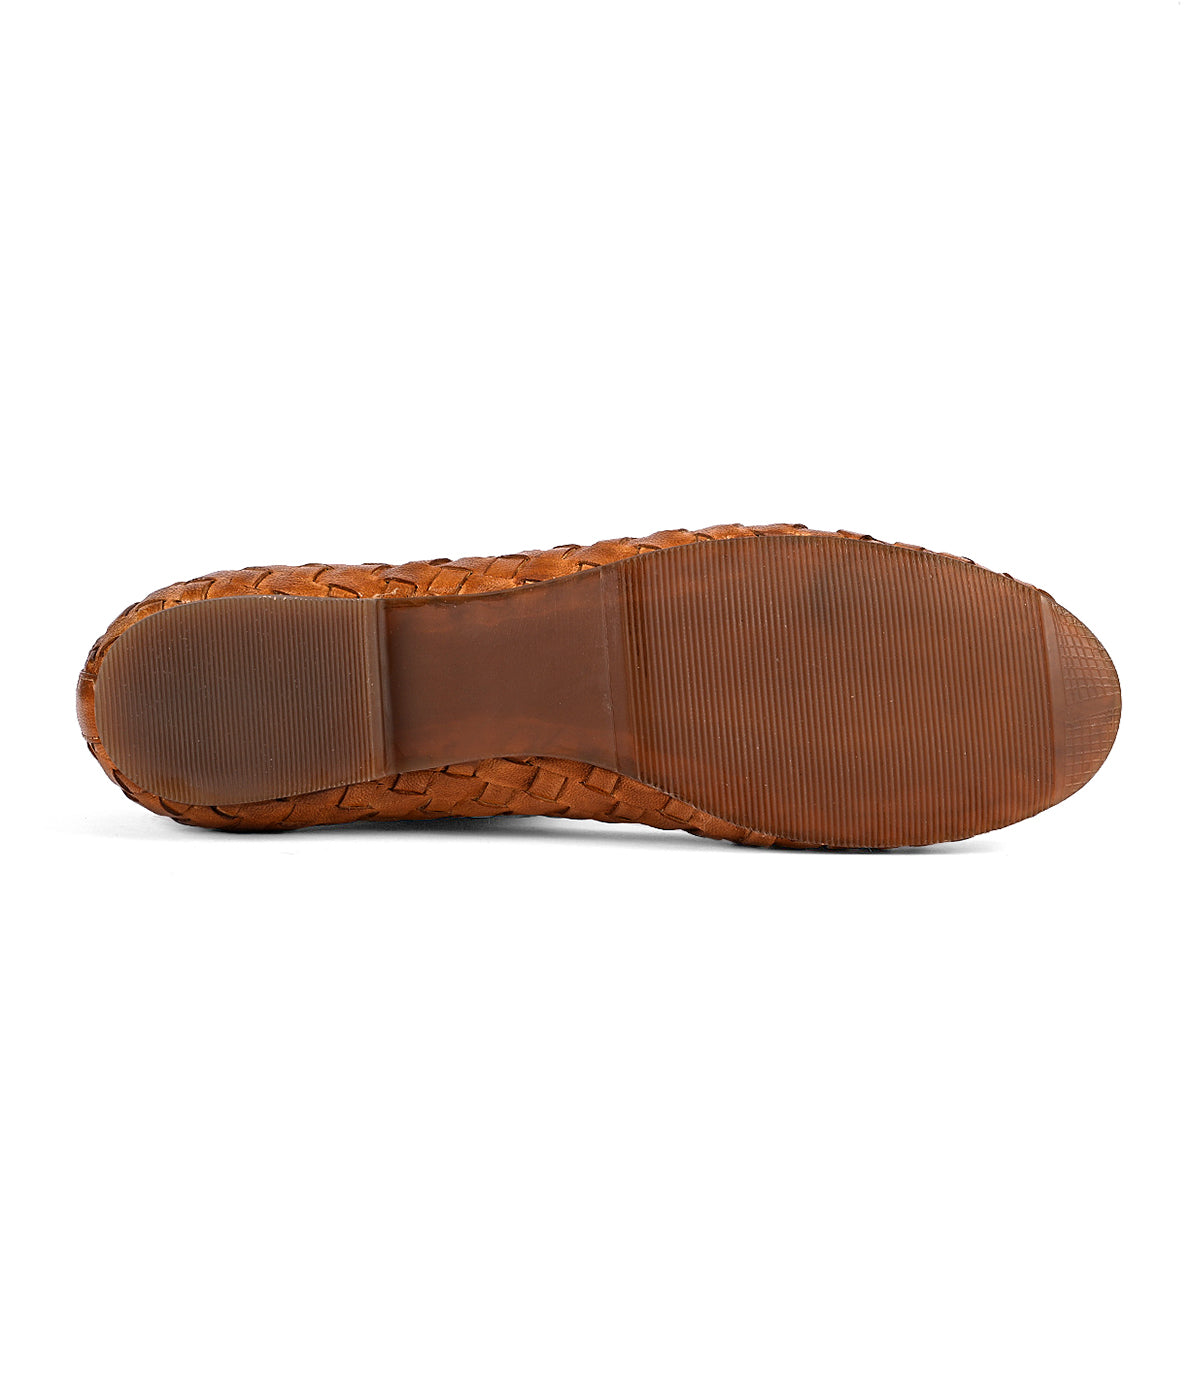 
                  
                    Bottom view of a brown Roan Business shoe sole featuring a textured tread pattern with a central smooth section, showcasing the intentional craftsmanship reminiscent of hand-woven leather designs.
                  
                